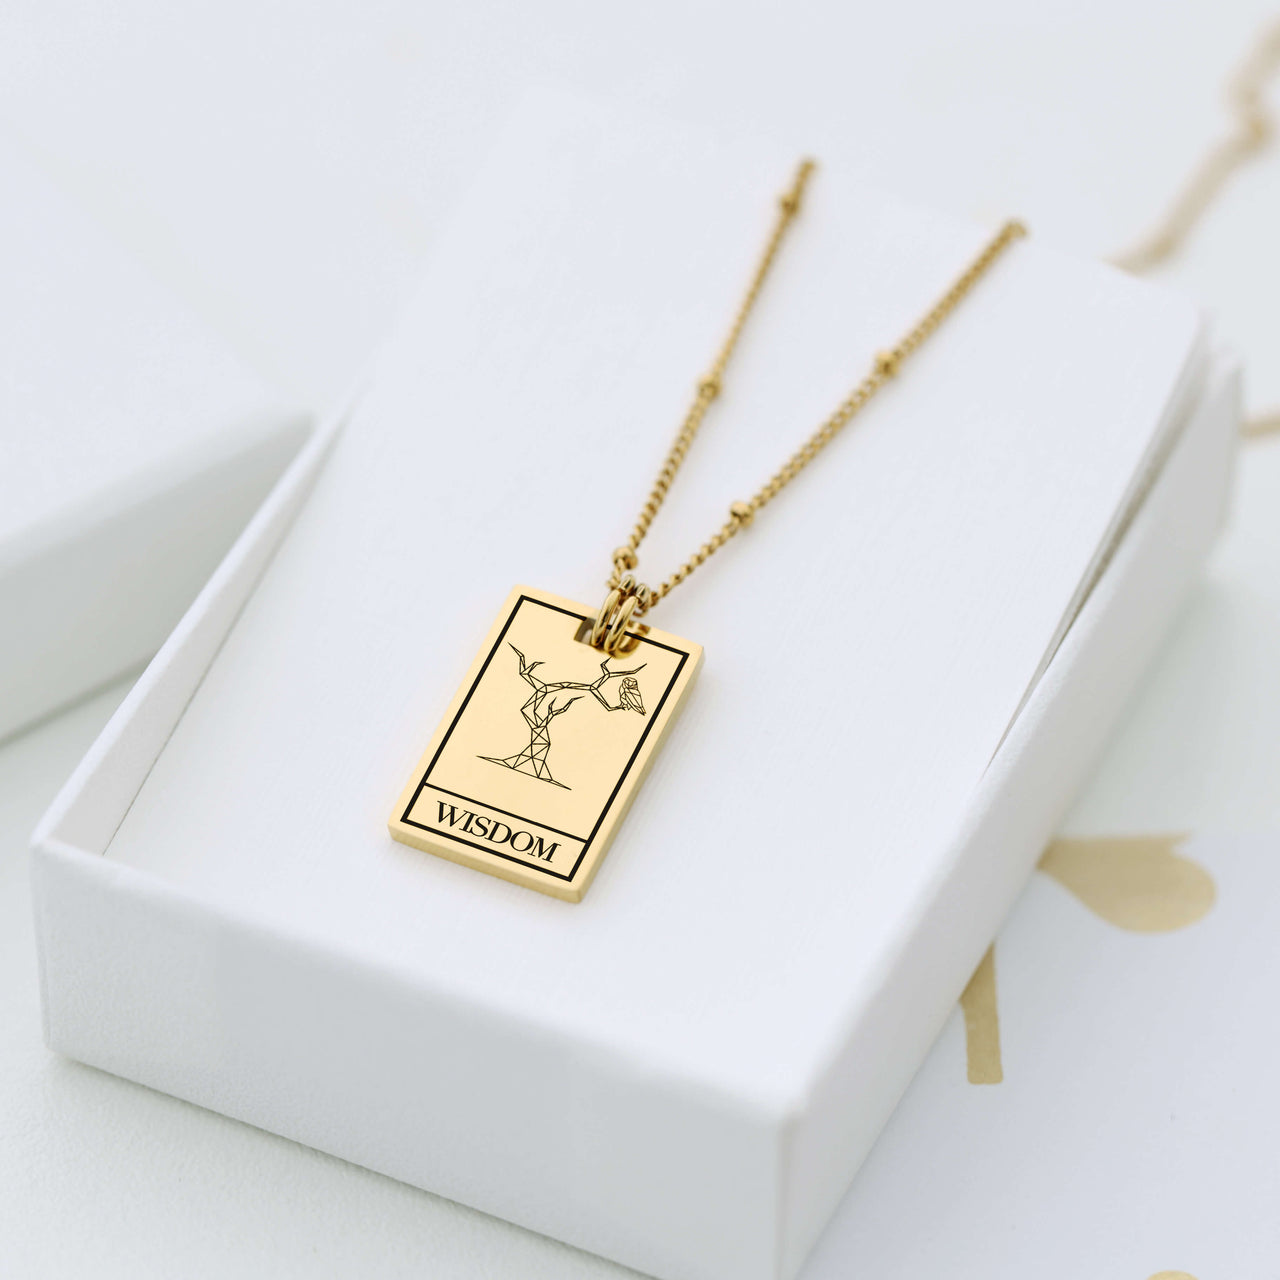 Minimalist Tarot Card Necklace in Gold & Rose gold